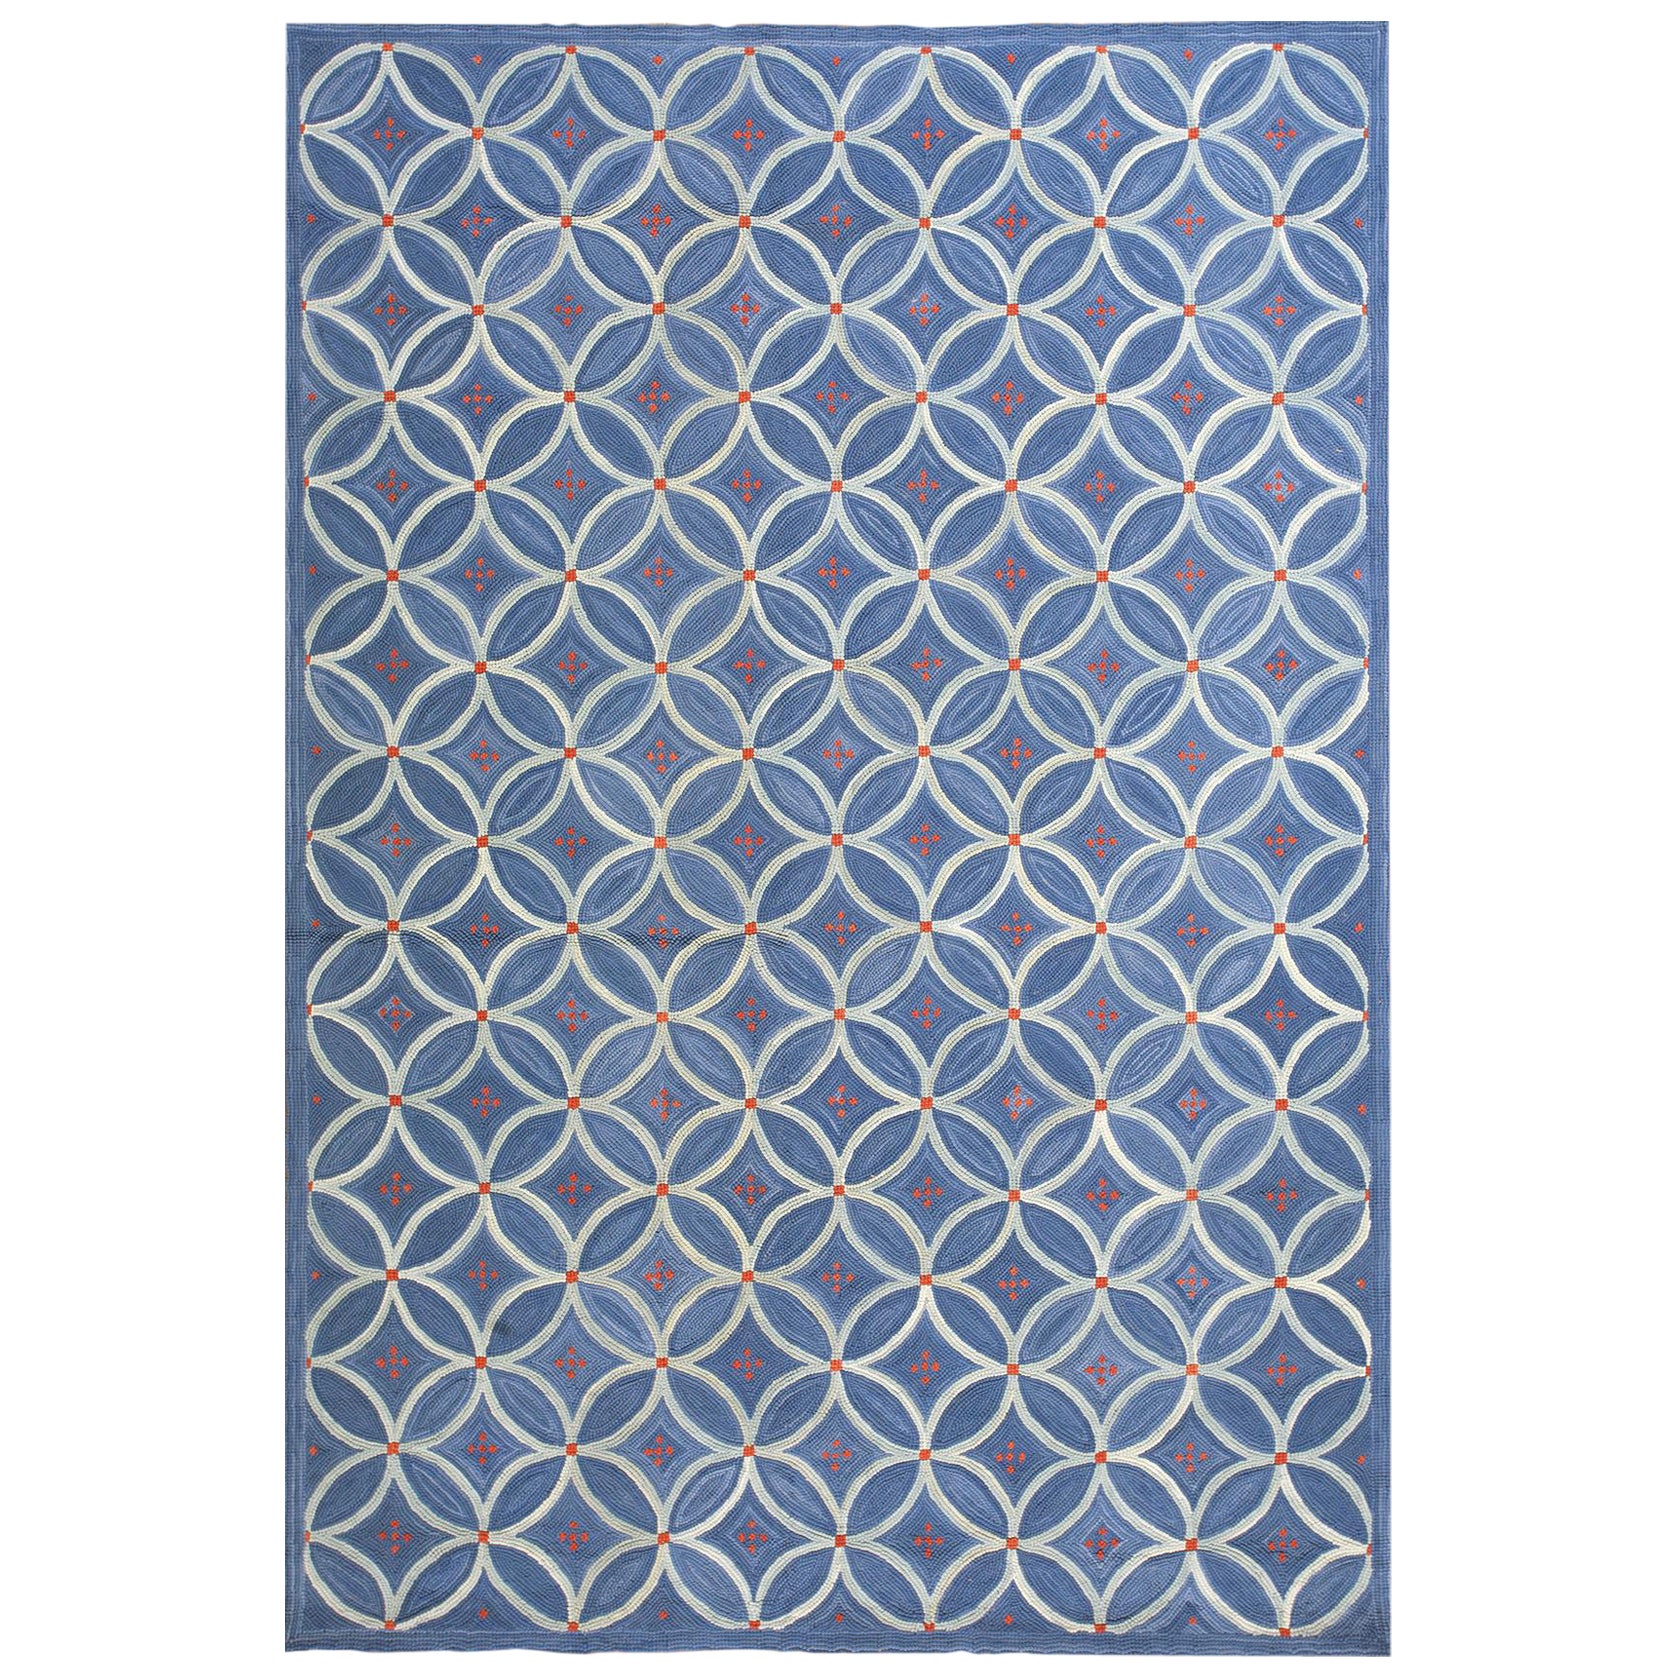 Contemporary American Hooked Rug 6' 0" x 9' 0" (183 x 274 cm) For Sale